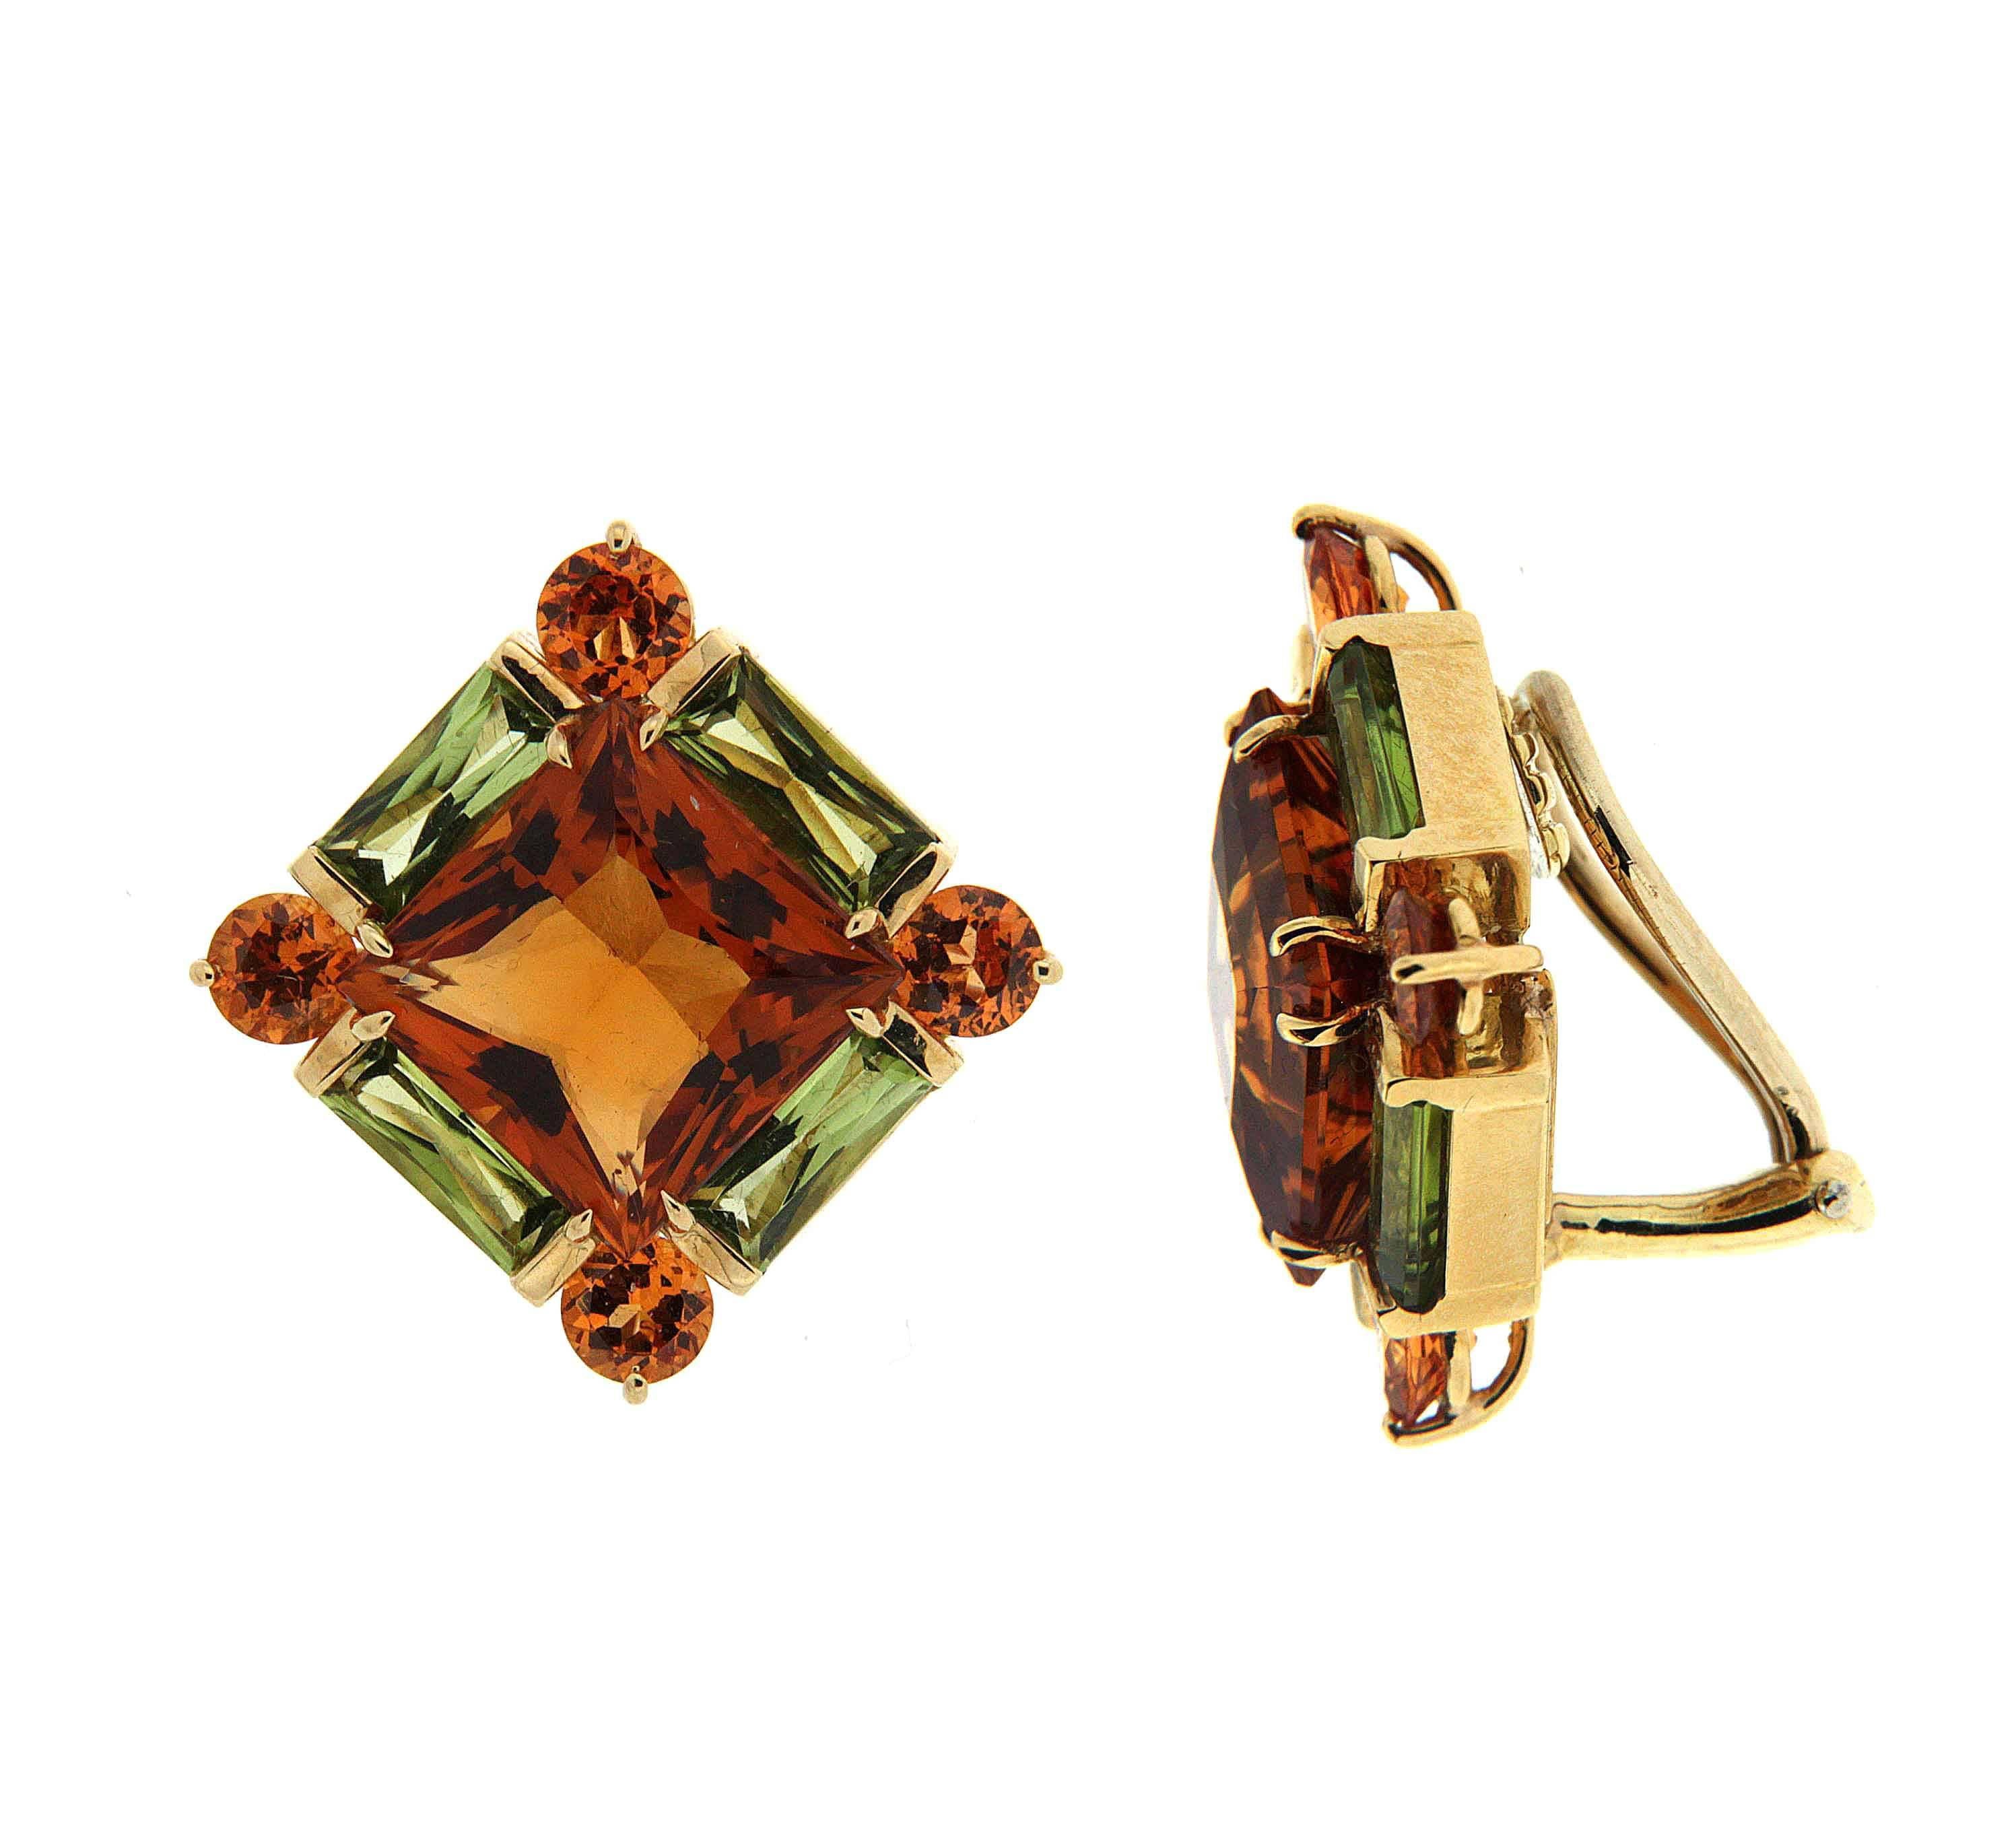 This lovely pair of earrings feature princess cut Citrines and Peridot Baguettes and round citrines on the side. The earrings are finished in 18kt yellow gold with clip backs.